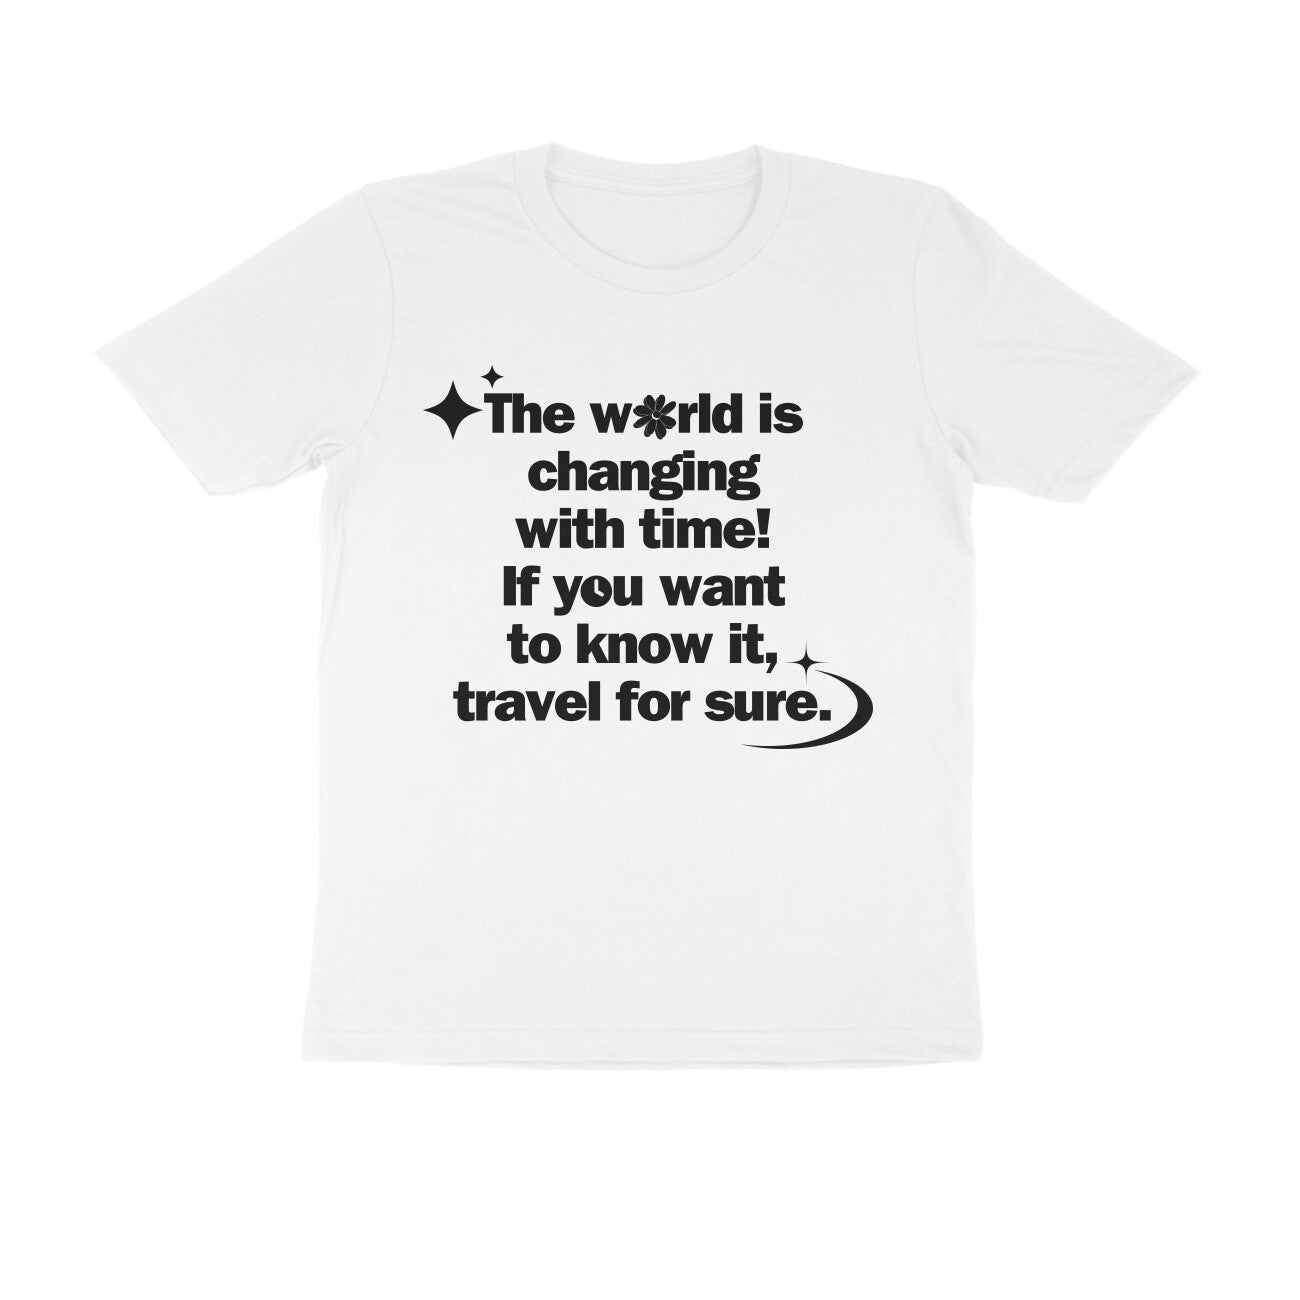 The world is changing with time... Black Text Men's T-shirt